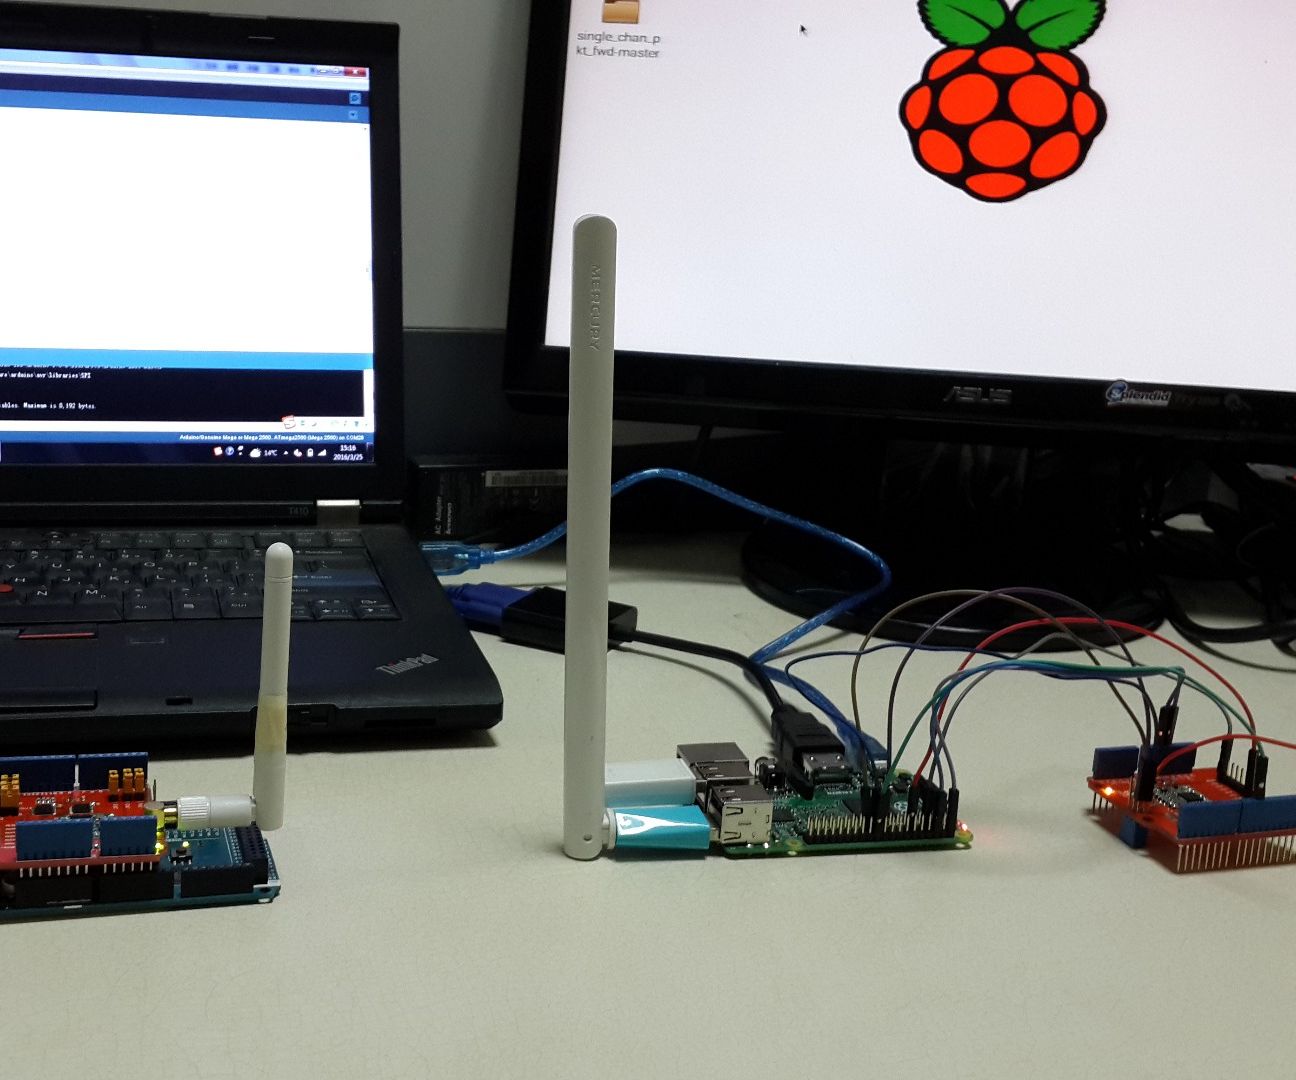 Use Lora shield and RPi to build a LoRaWAN gateway